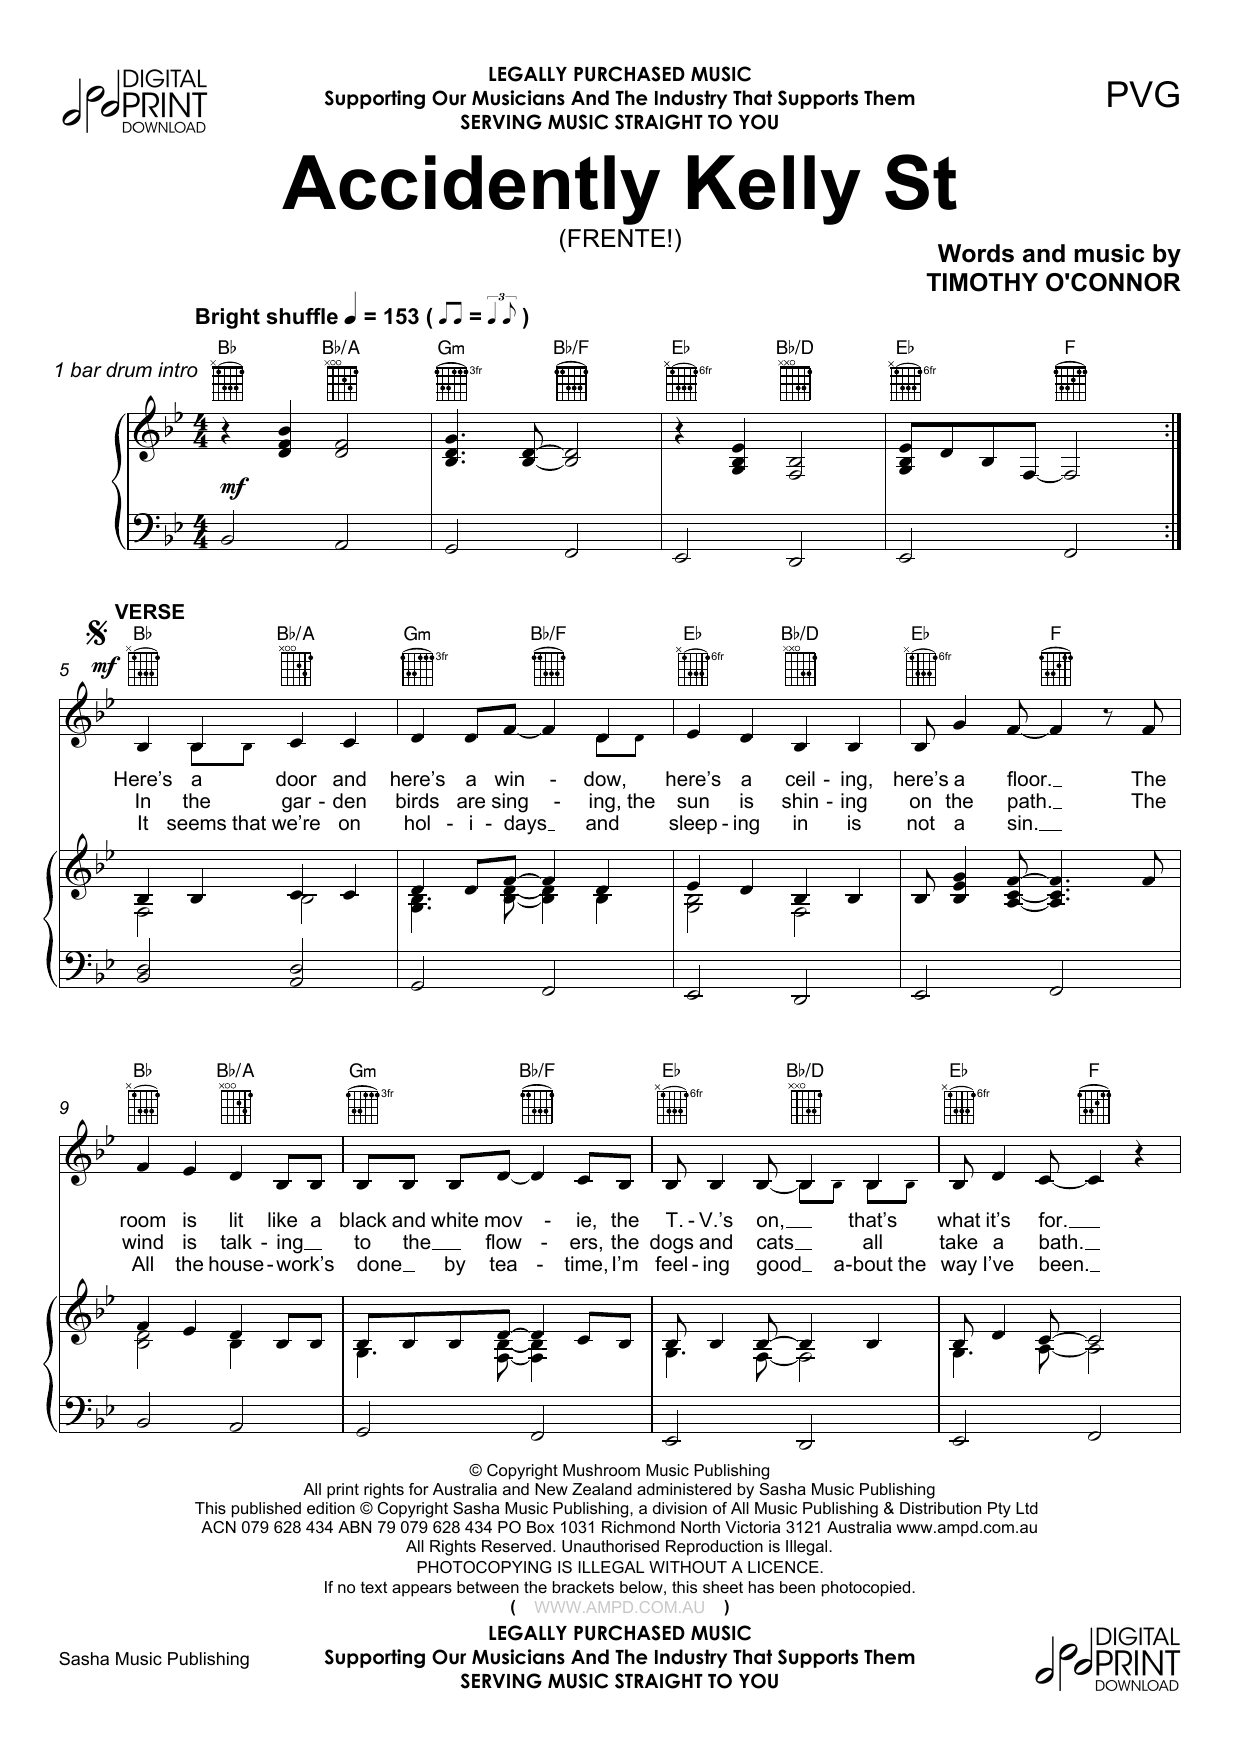 Accidently Kelly St sheet music